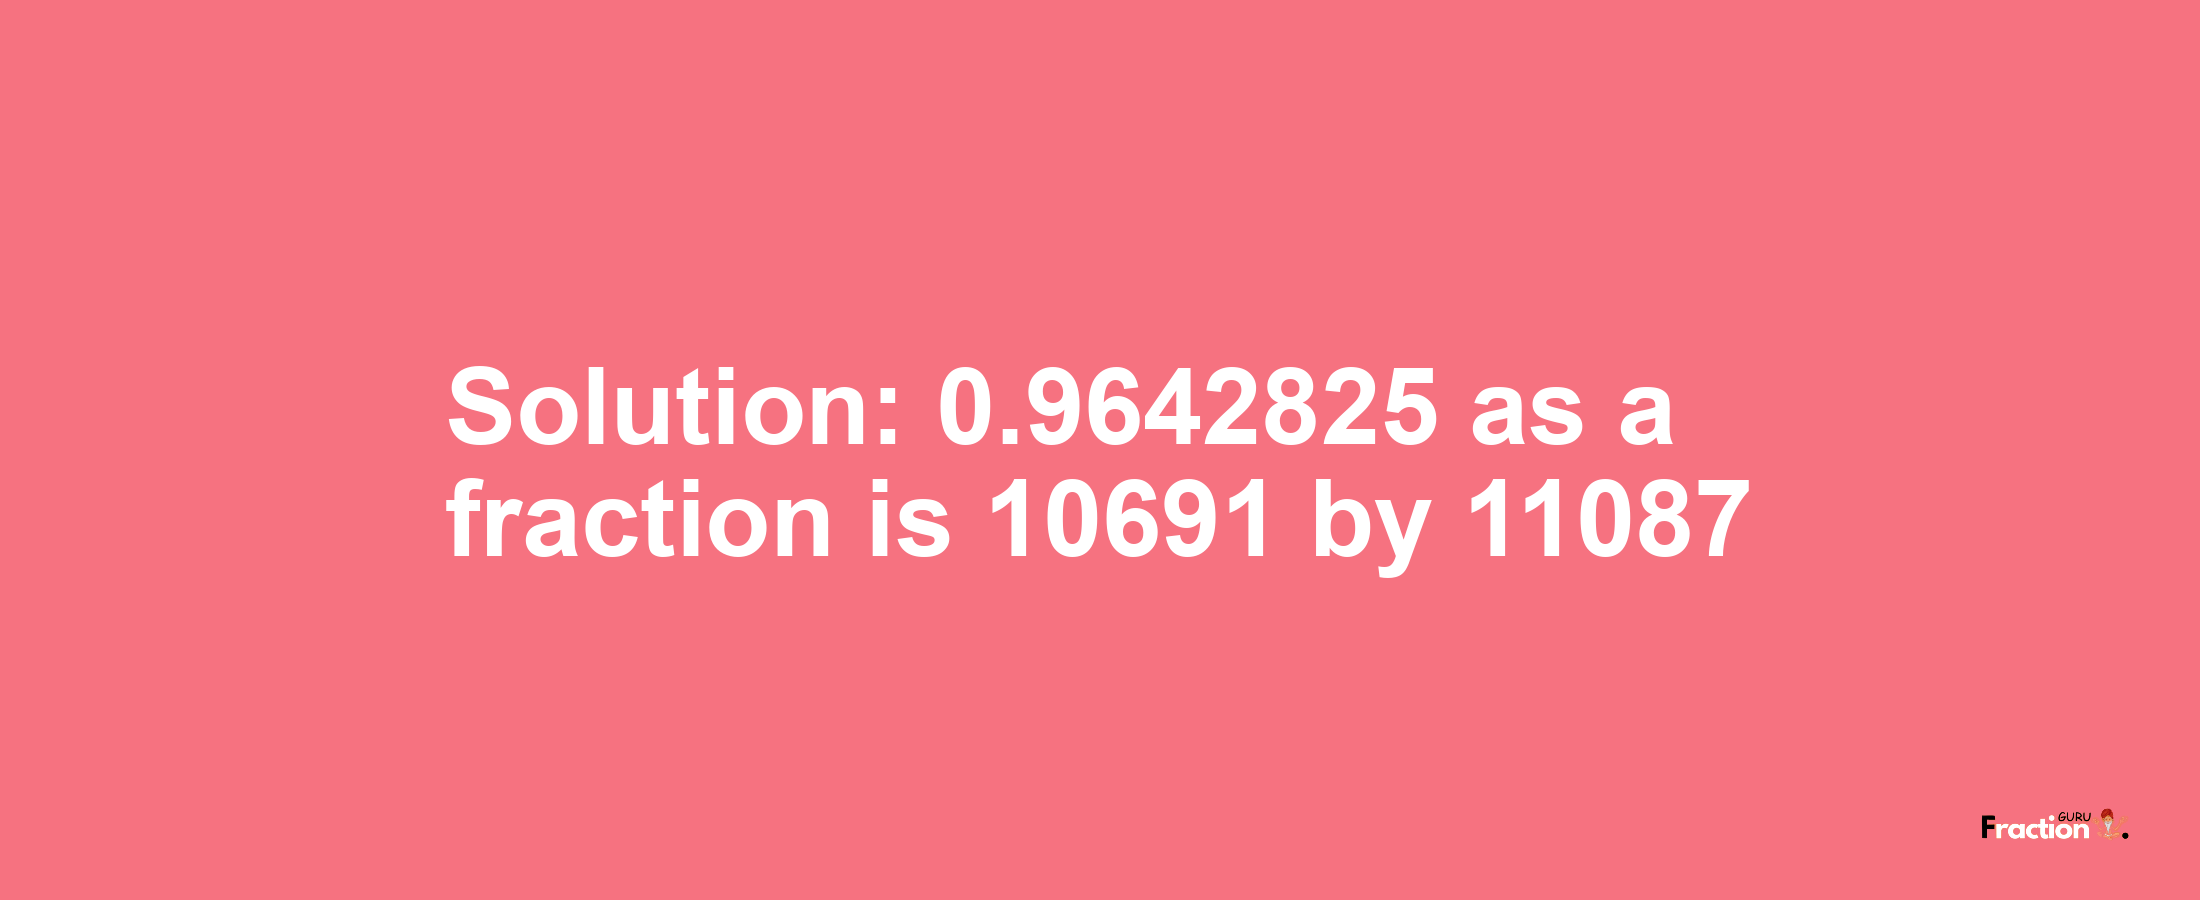 Solution:0.9642825 as a fraction is 10691/11087